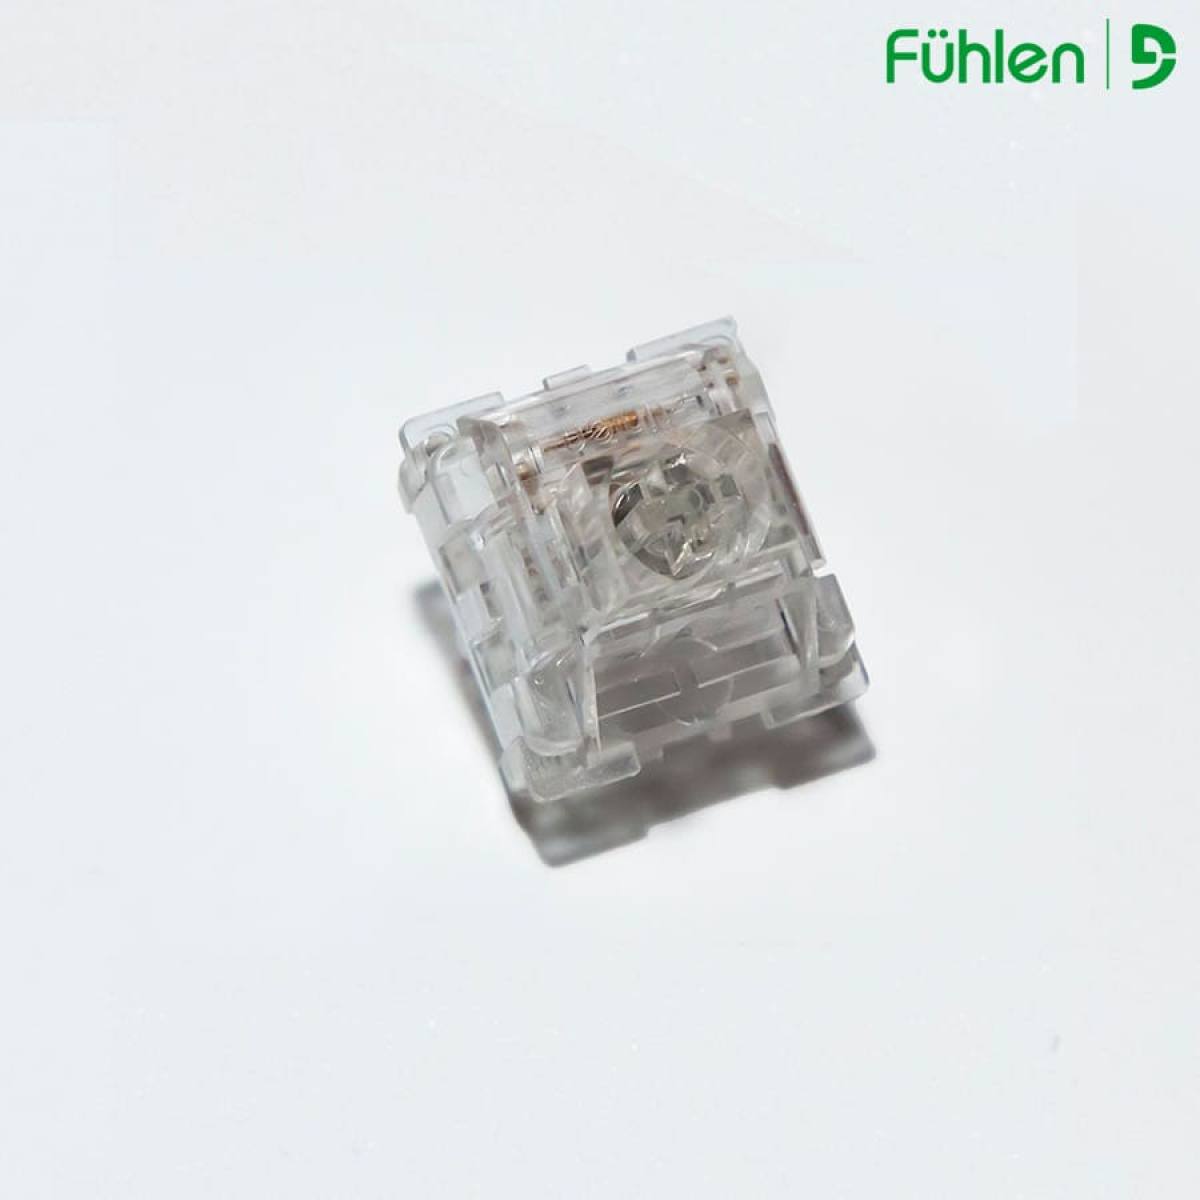 Switch Fuhlen Ice Crystal | 5 pins